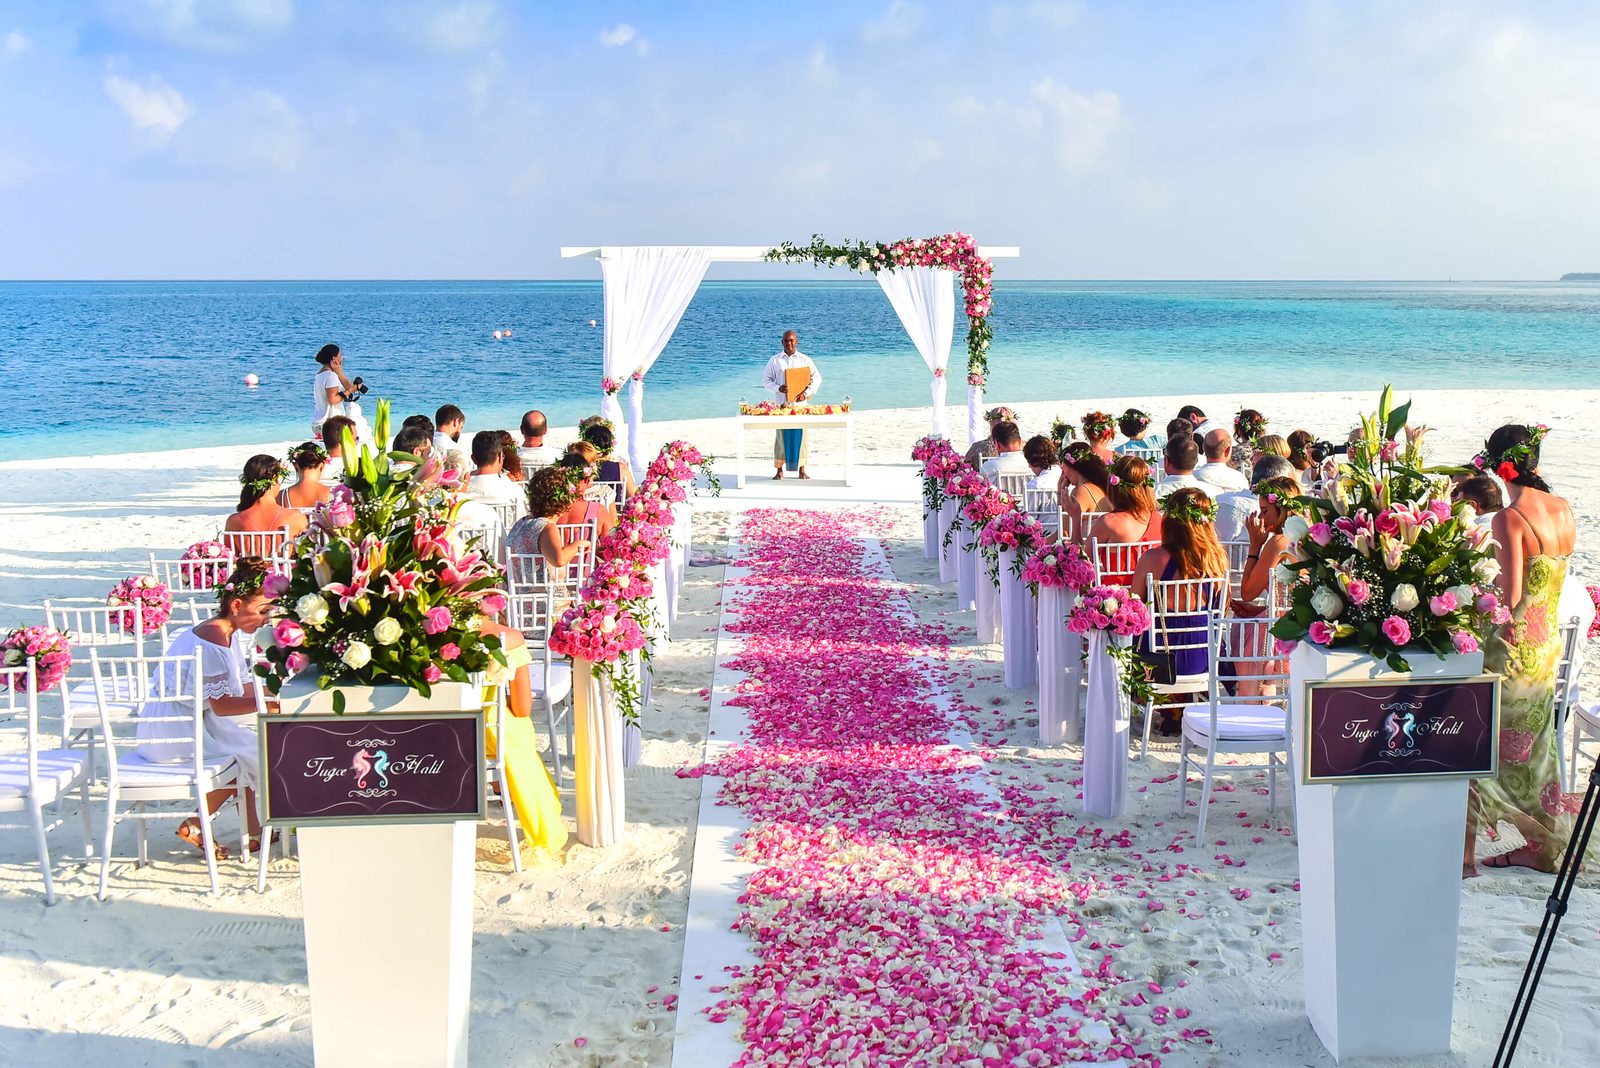 A Bonaire wedding is the dream of many couples! Who does not want to marry the love of their life on a beautiful and sunny island as Bonaire? 